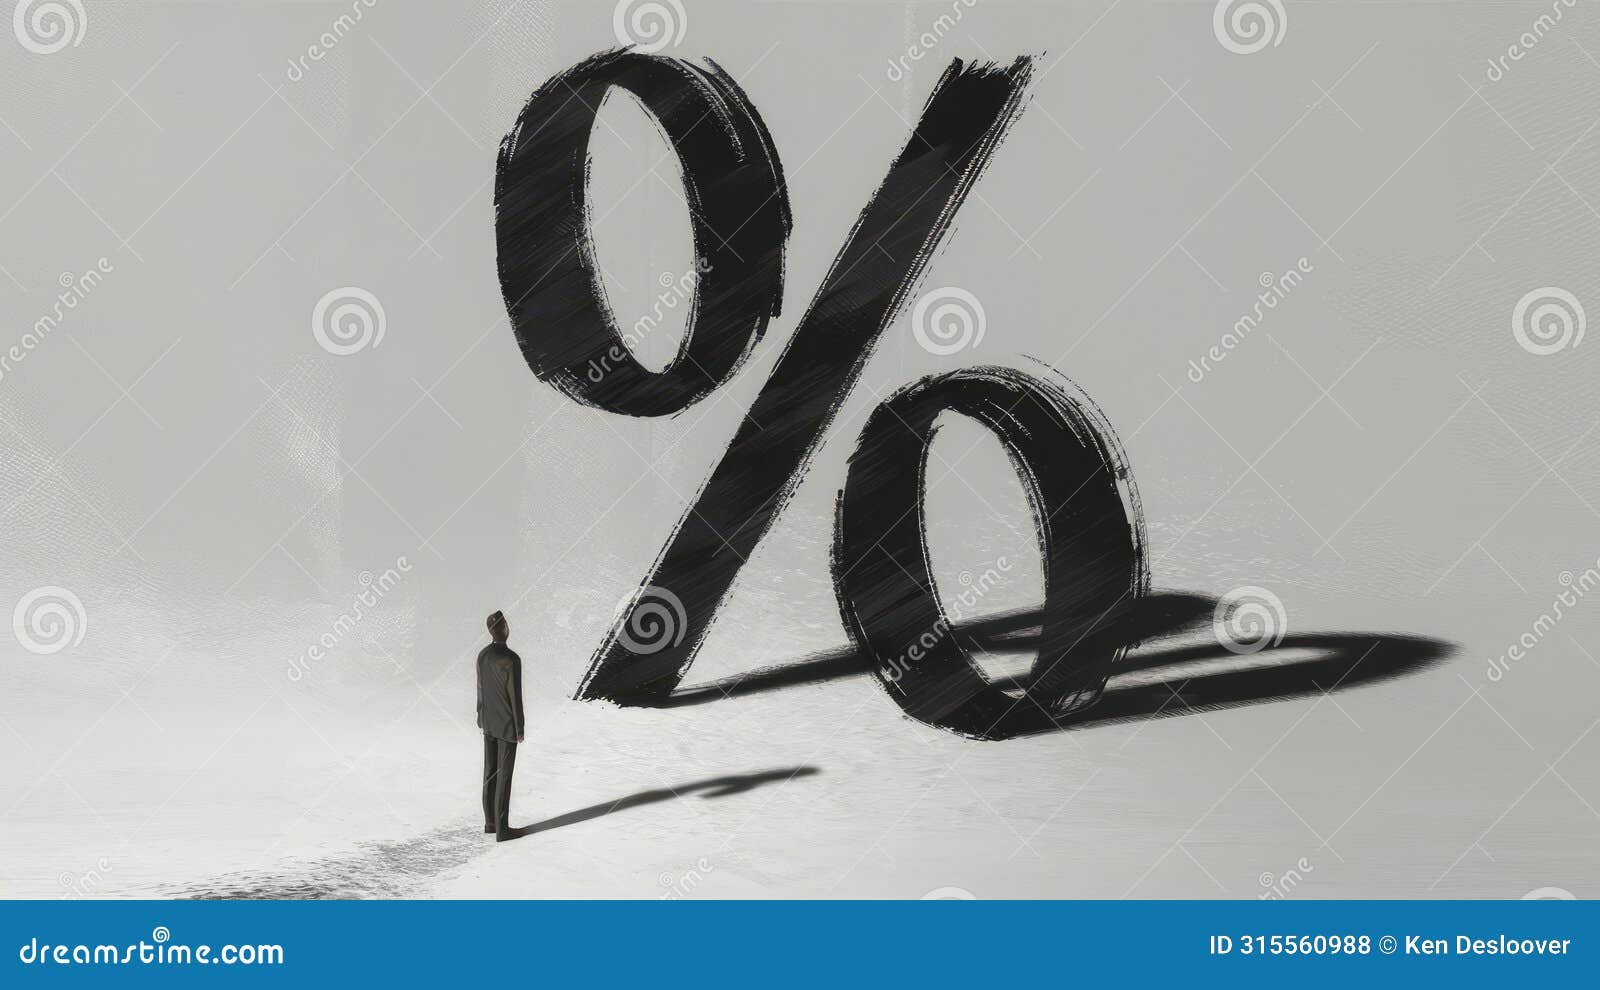 giant percentage sign significant lone figure, copy-space, big financial decision